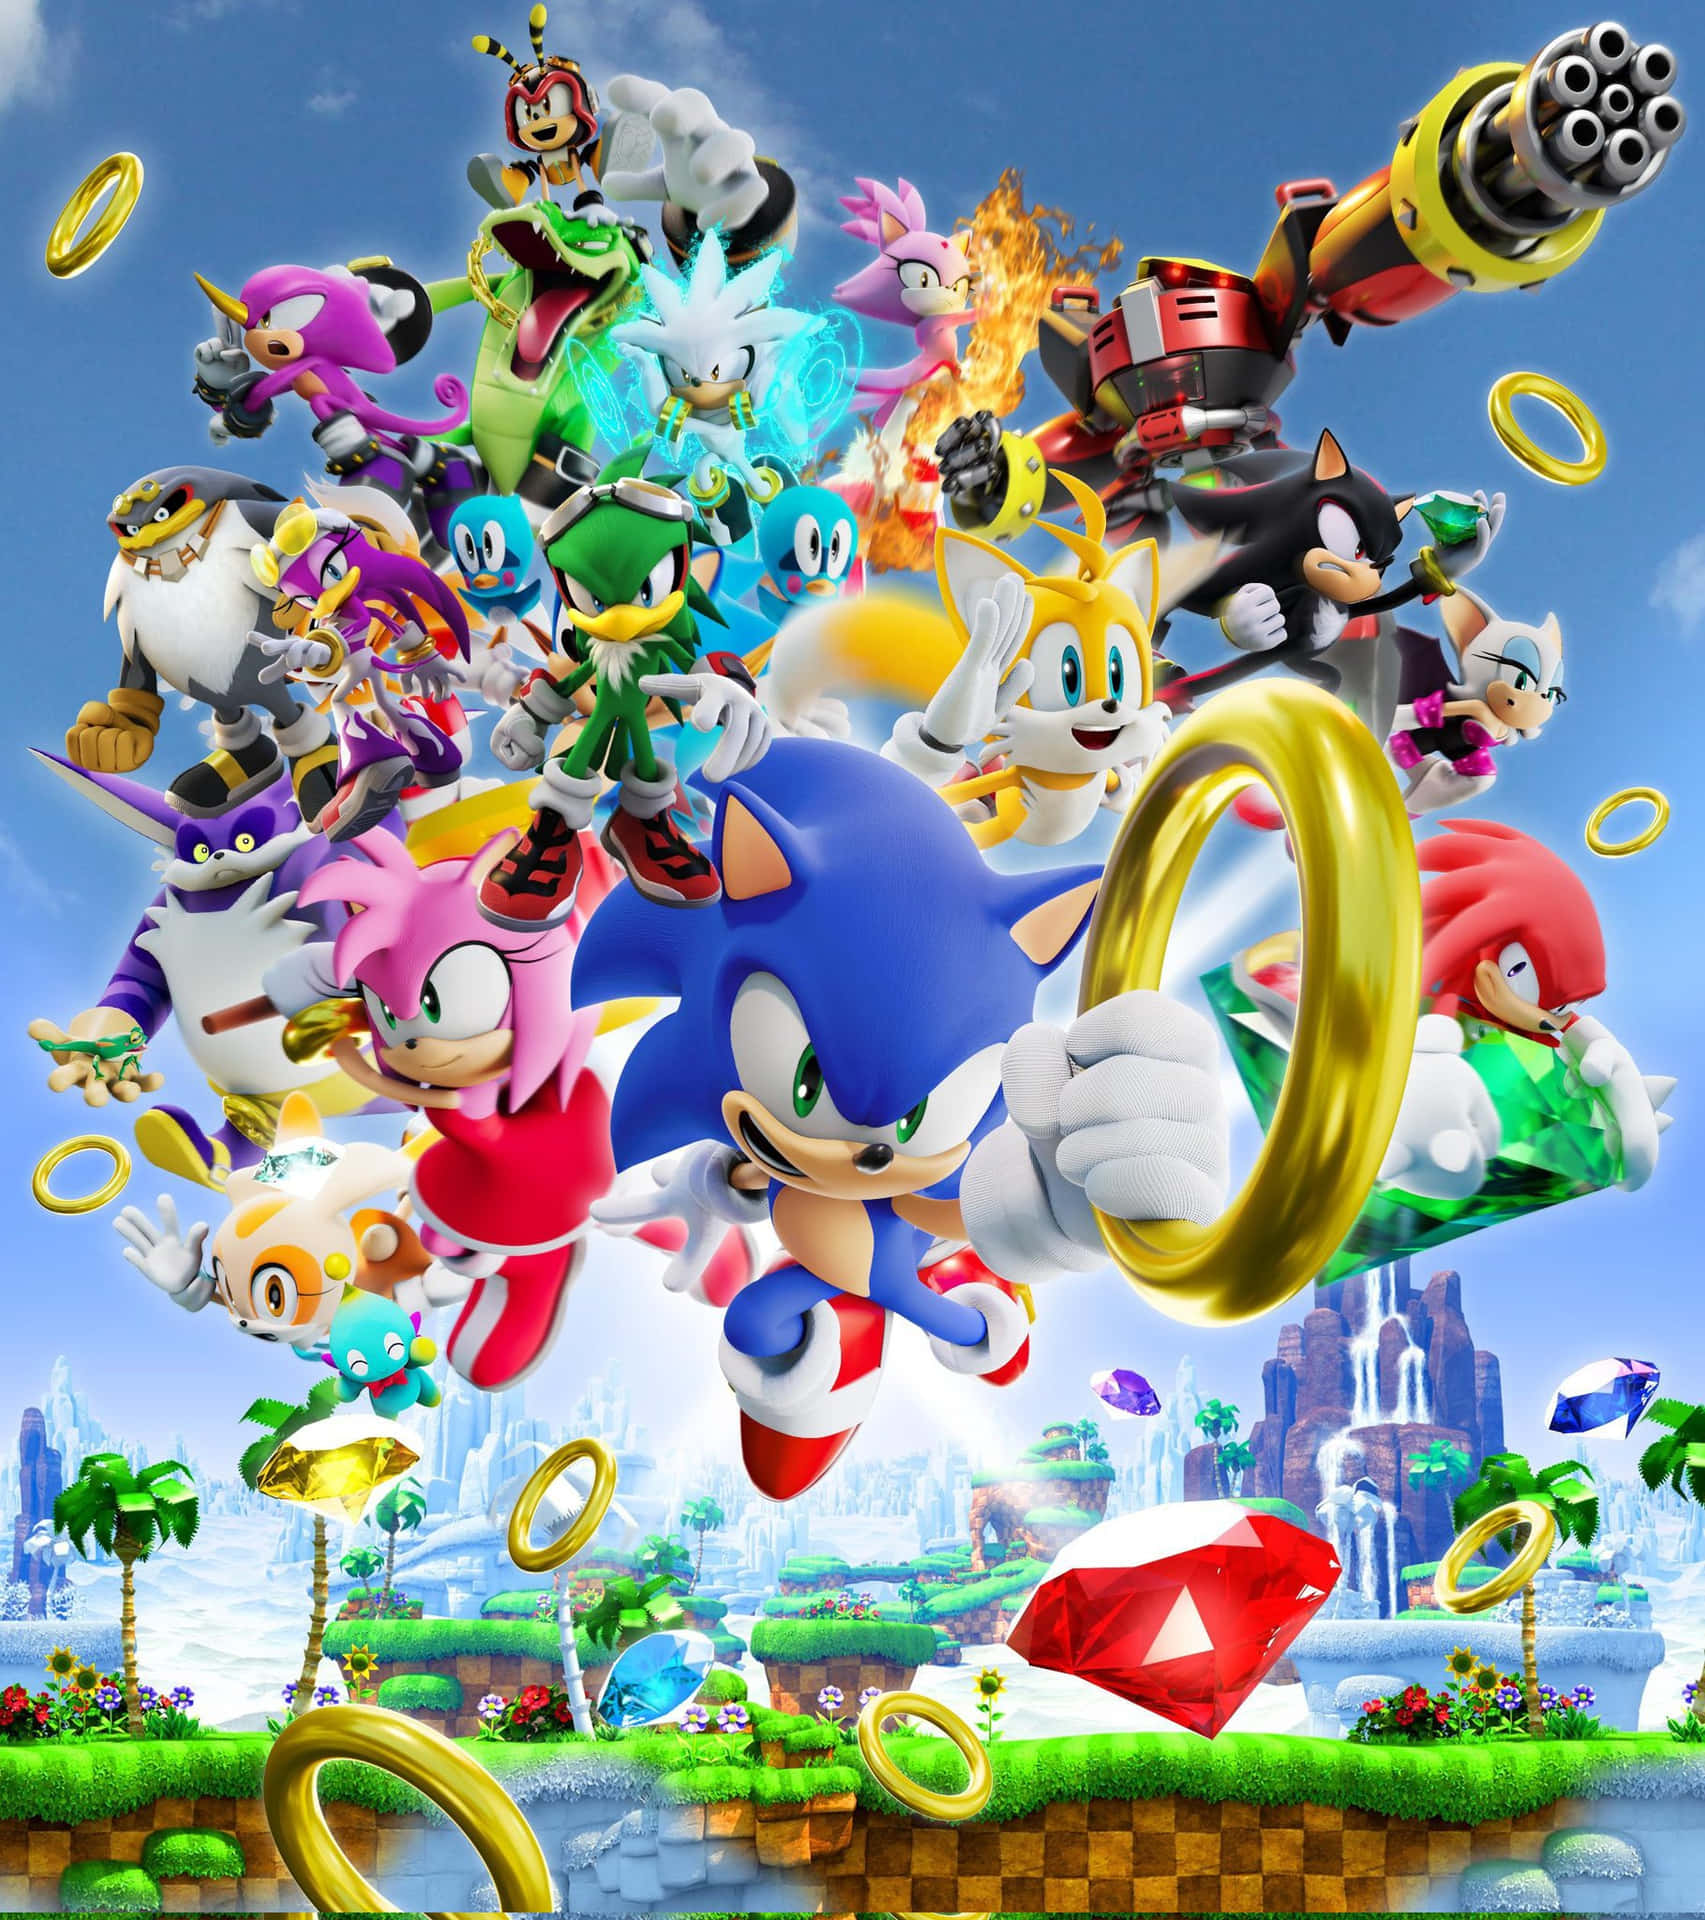 Download Sonic Characters Gathered Together Wallpaper | Wallpapers.com